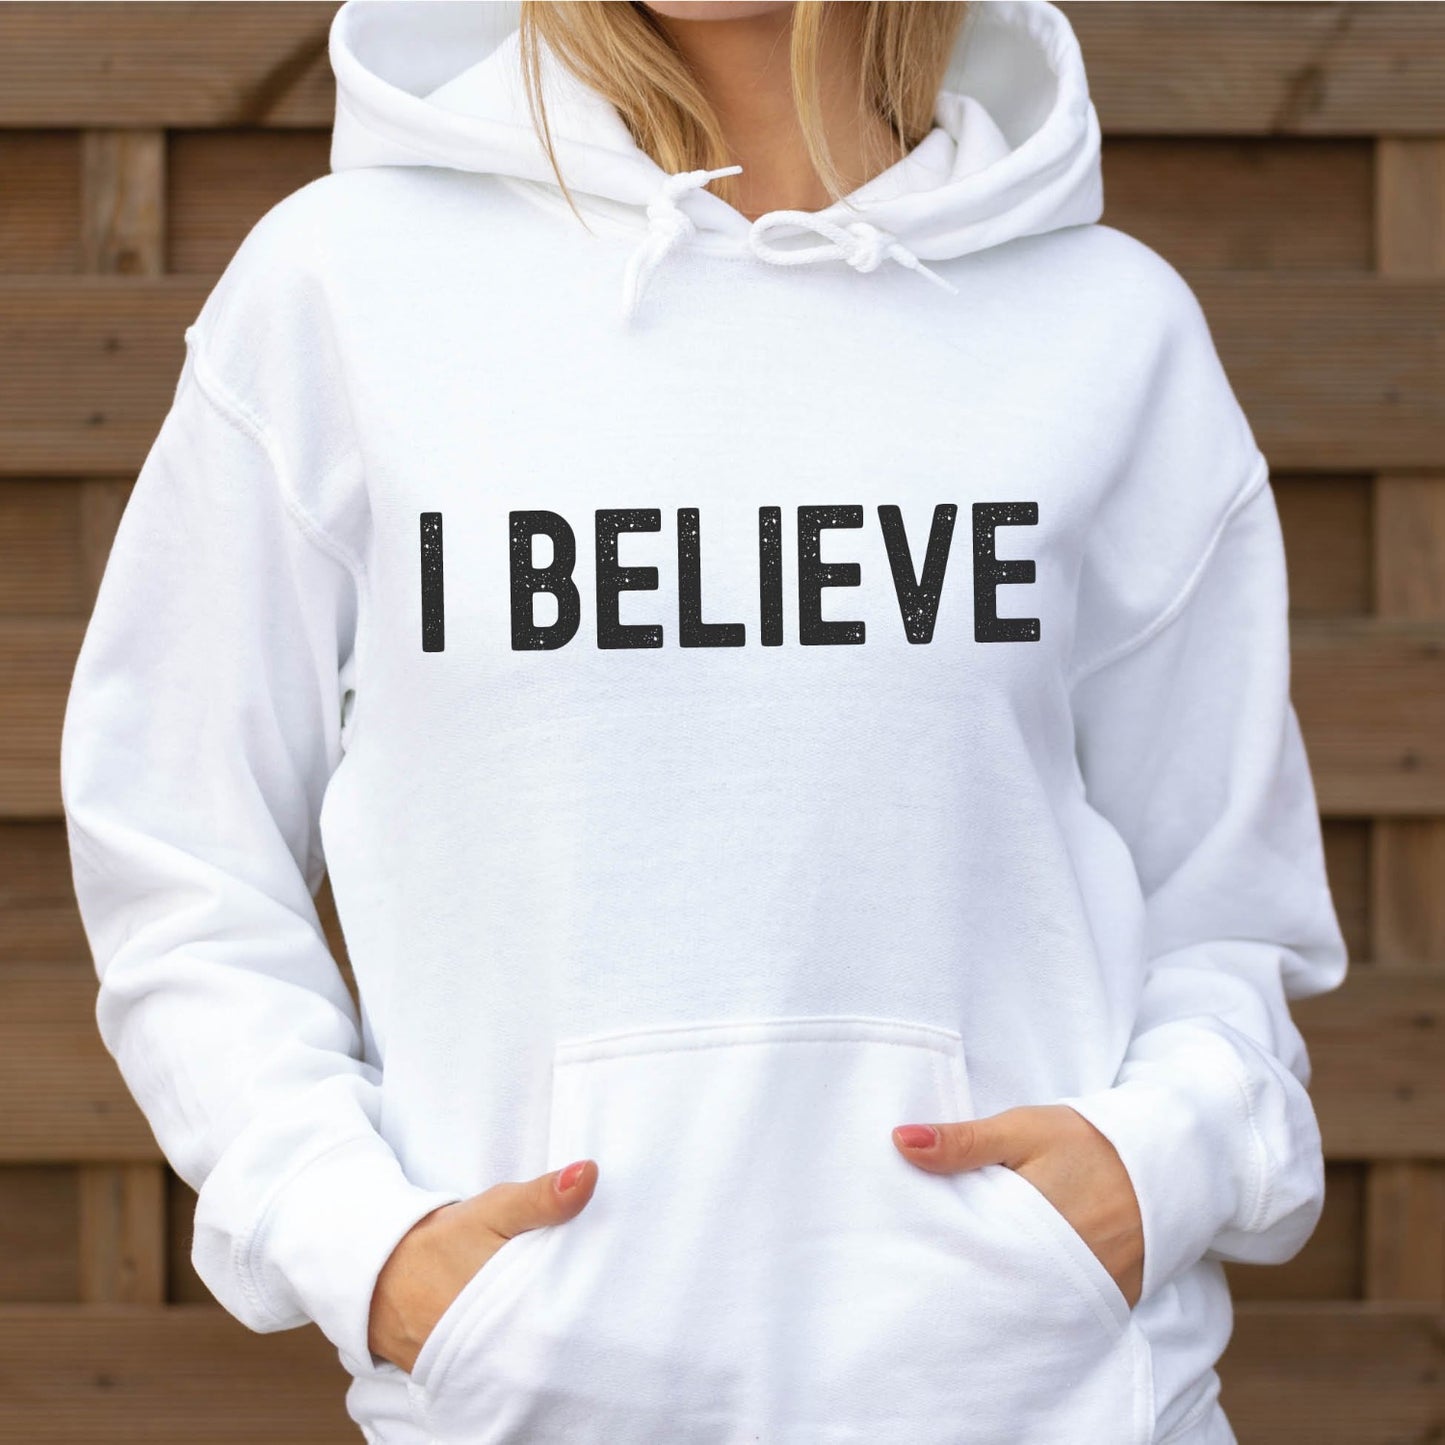 Faith-based "I Believe" Christian aesthetic faith statement design printed in distressed black words on cozy white unisex hoodie sweatshirt, created for Christian men and women